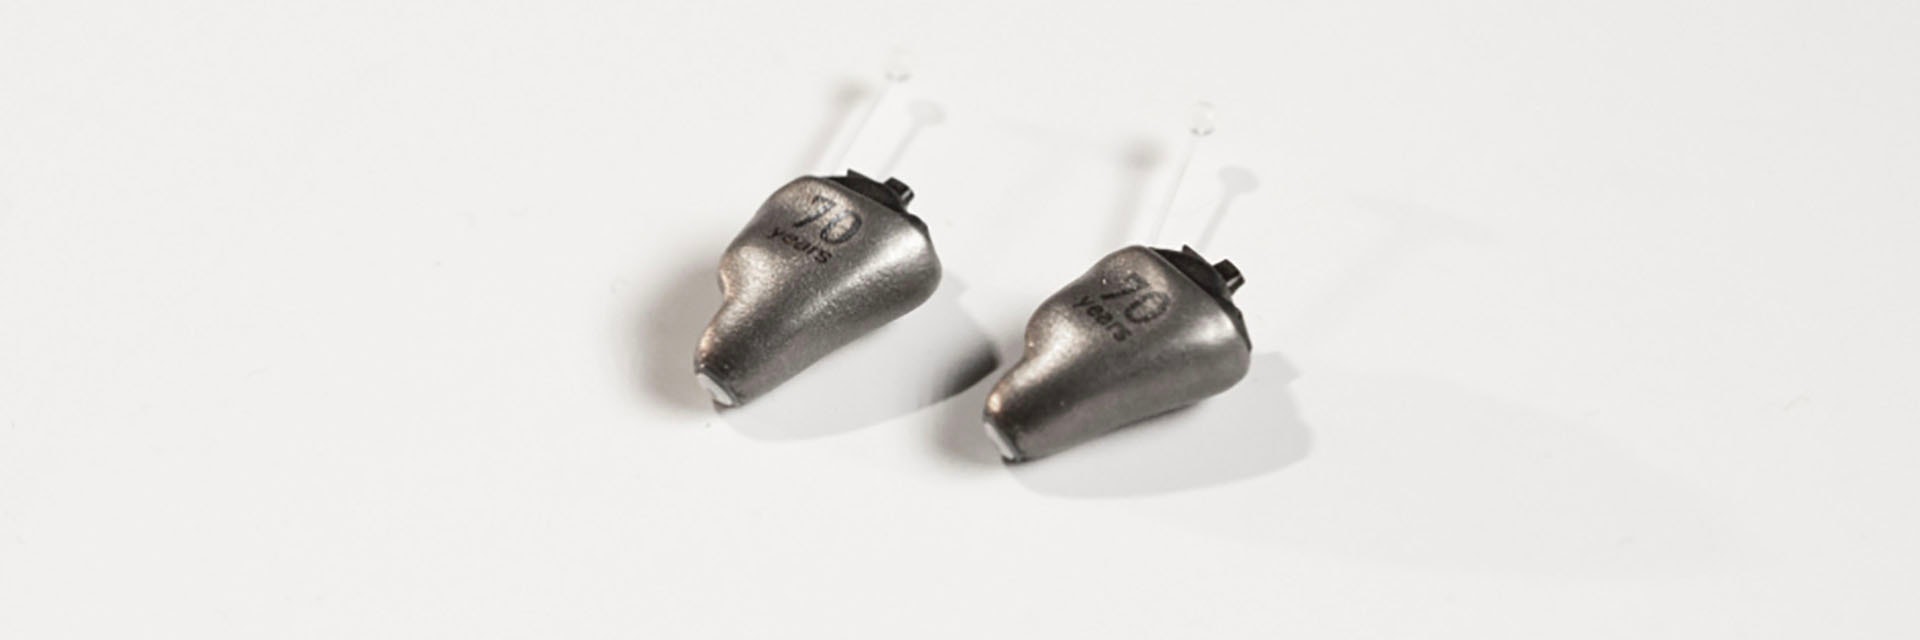 Metal 3D-printed hearing aids with '70 years' etched in the material